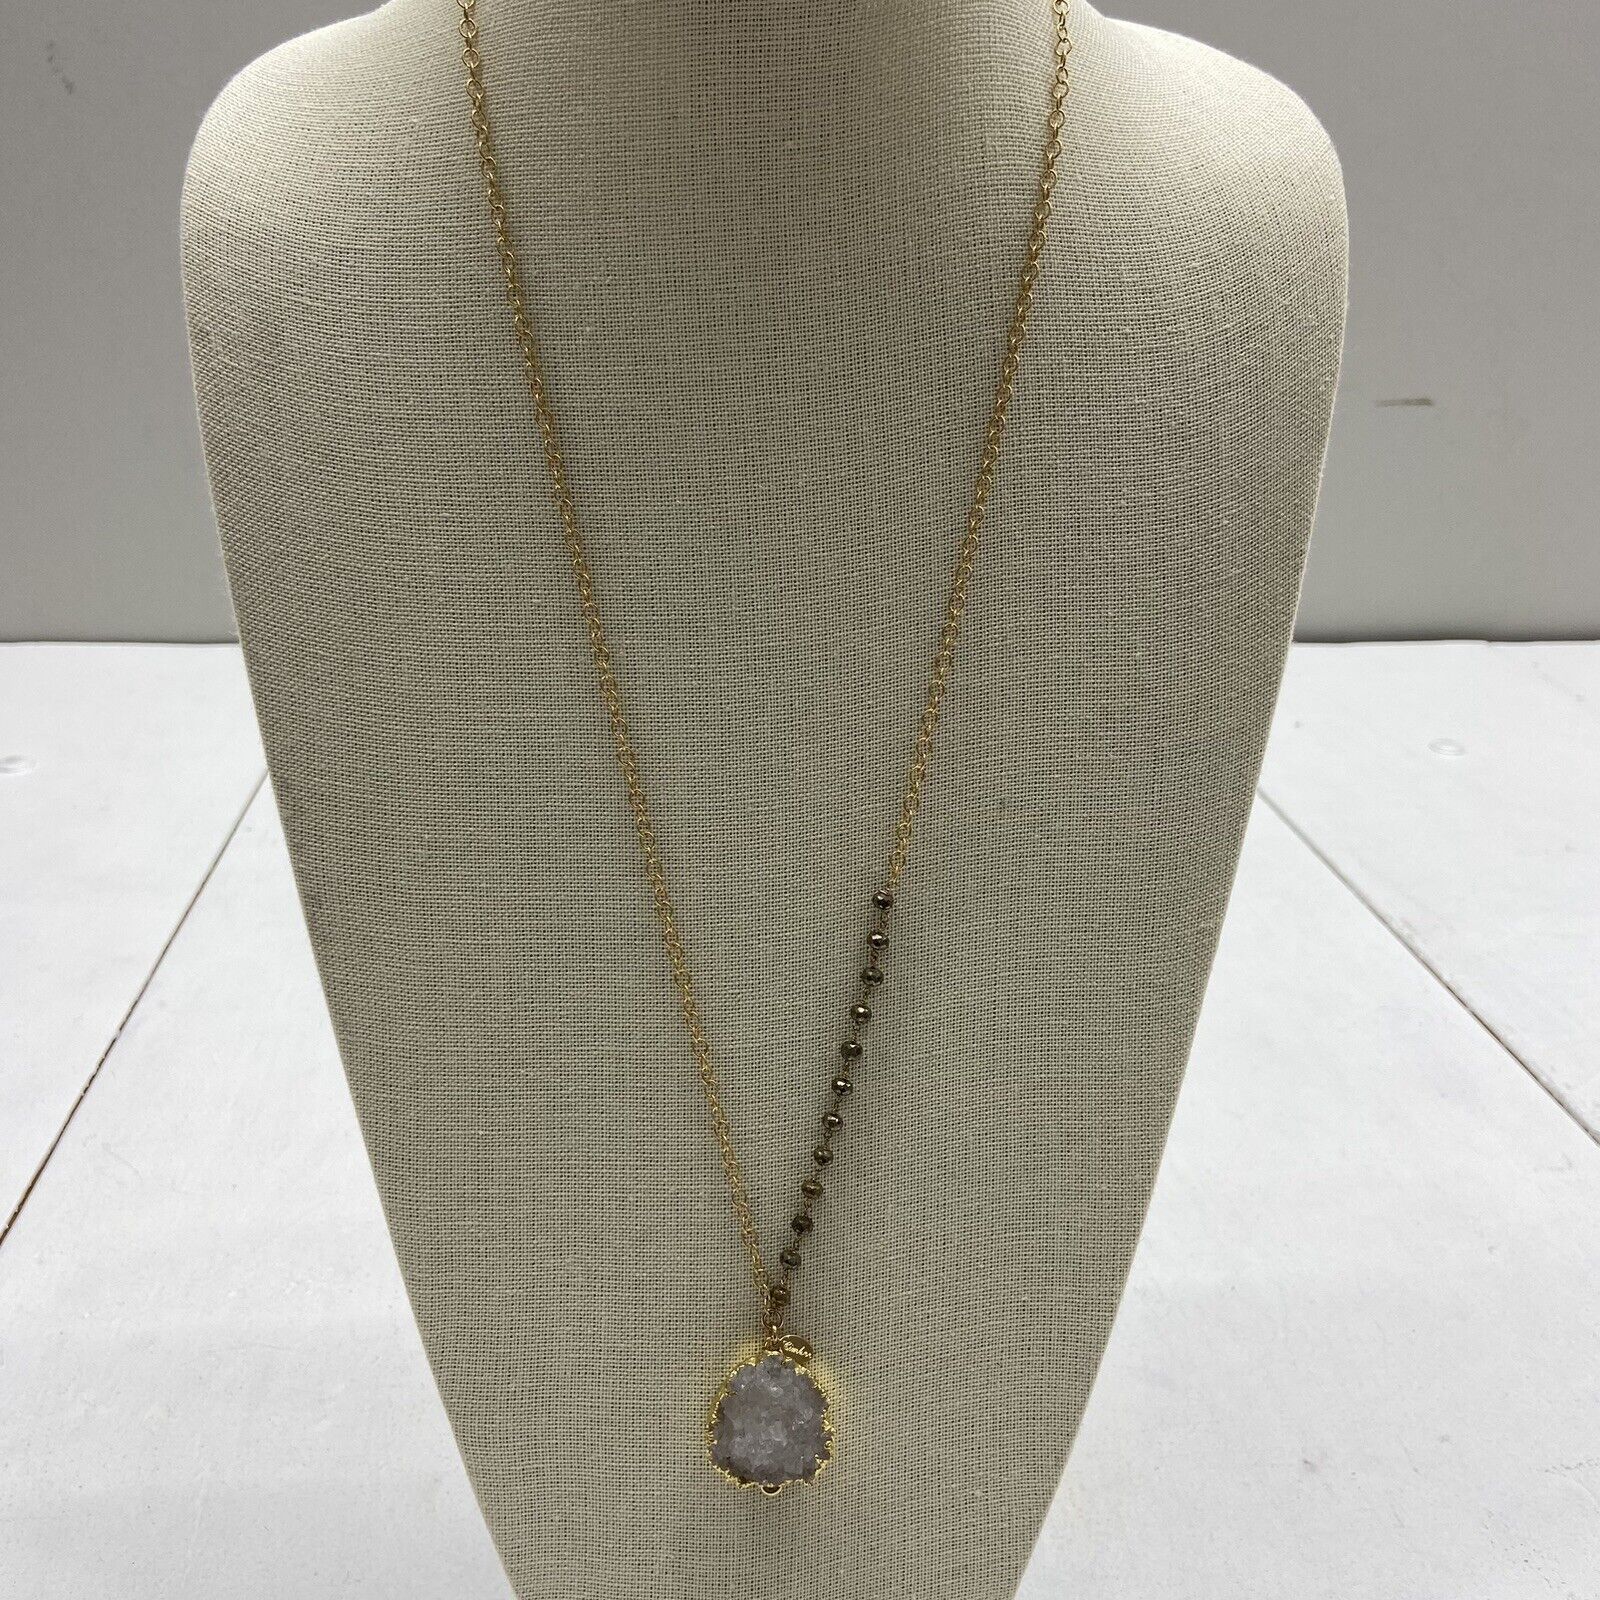 Kelly Cimber Gold Tone Chain Necklace With White Crystal Cluster Pendant 15”